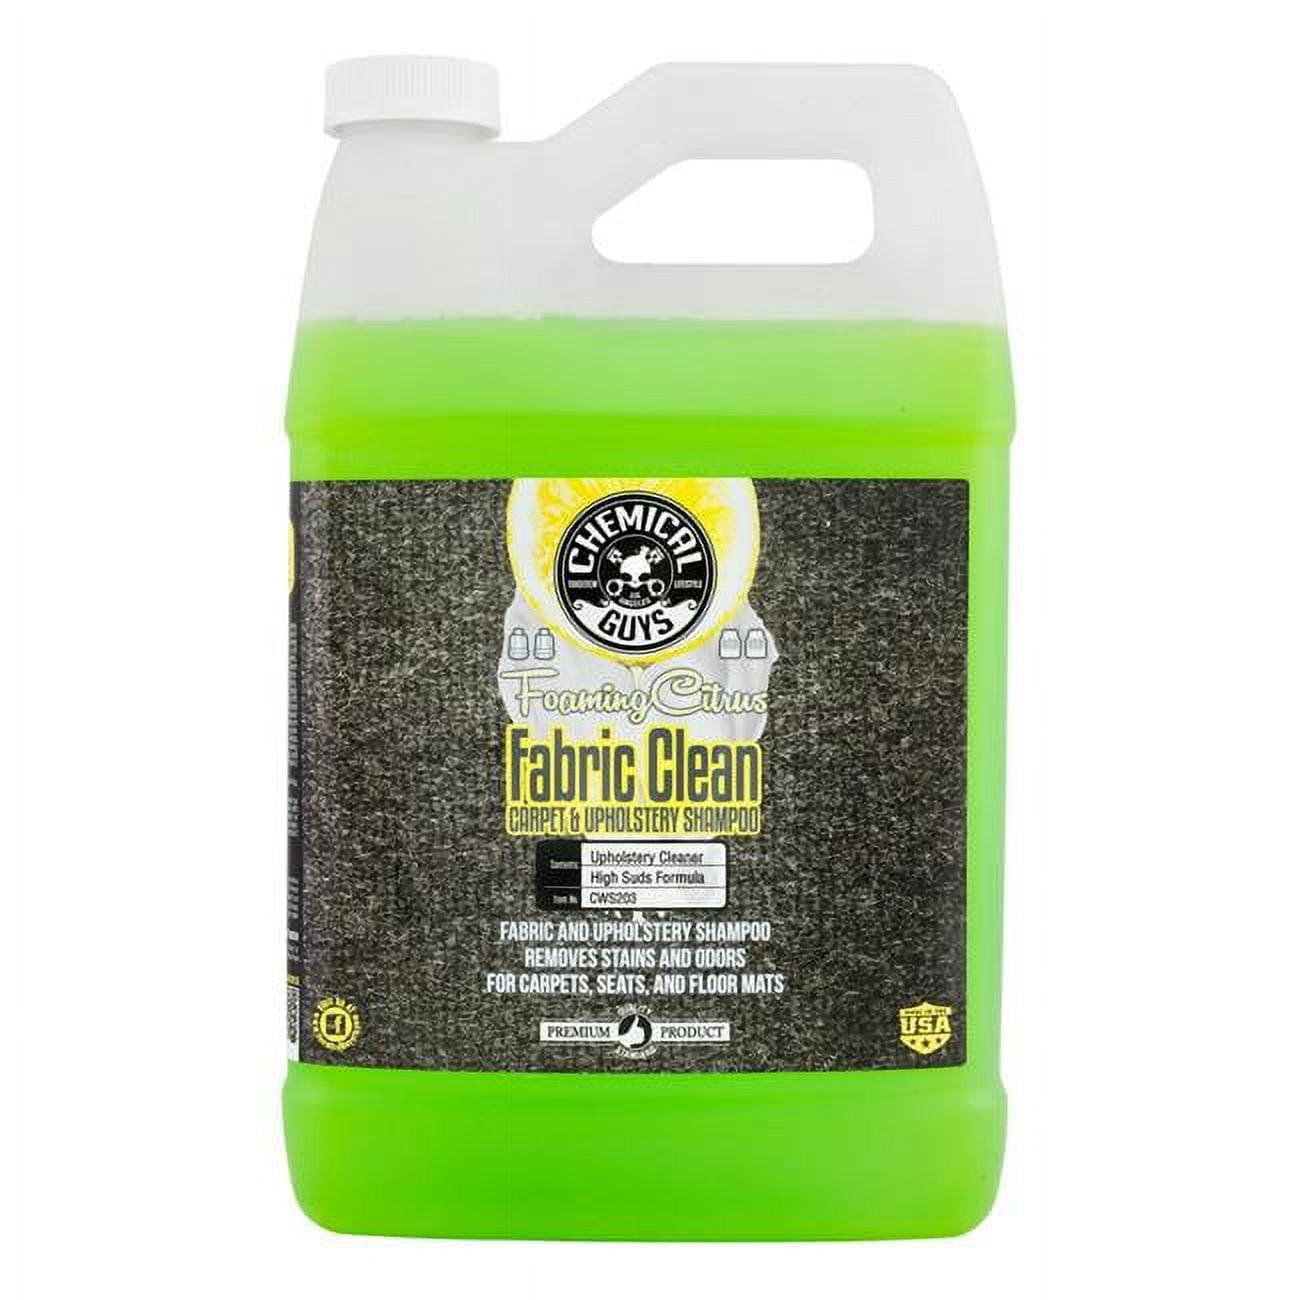 3*NEW*Chemical Guys Foaming Citrus Fabric Clean Carpet & Upholstery Shampoo  48oz